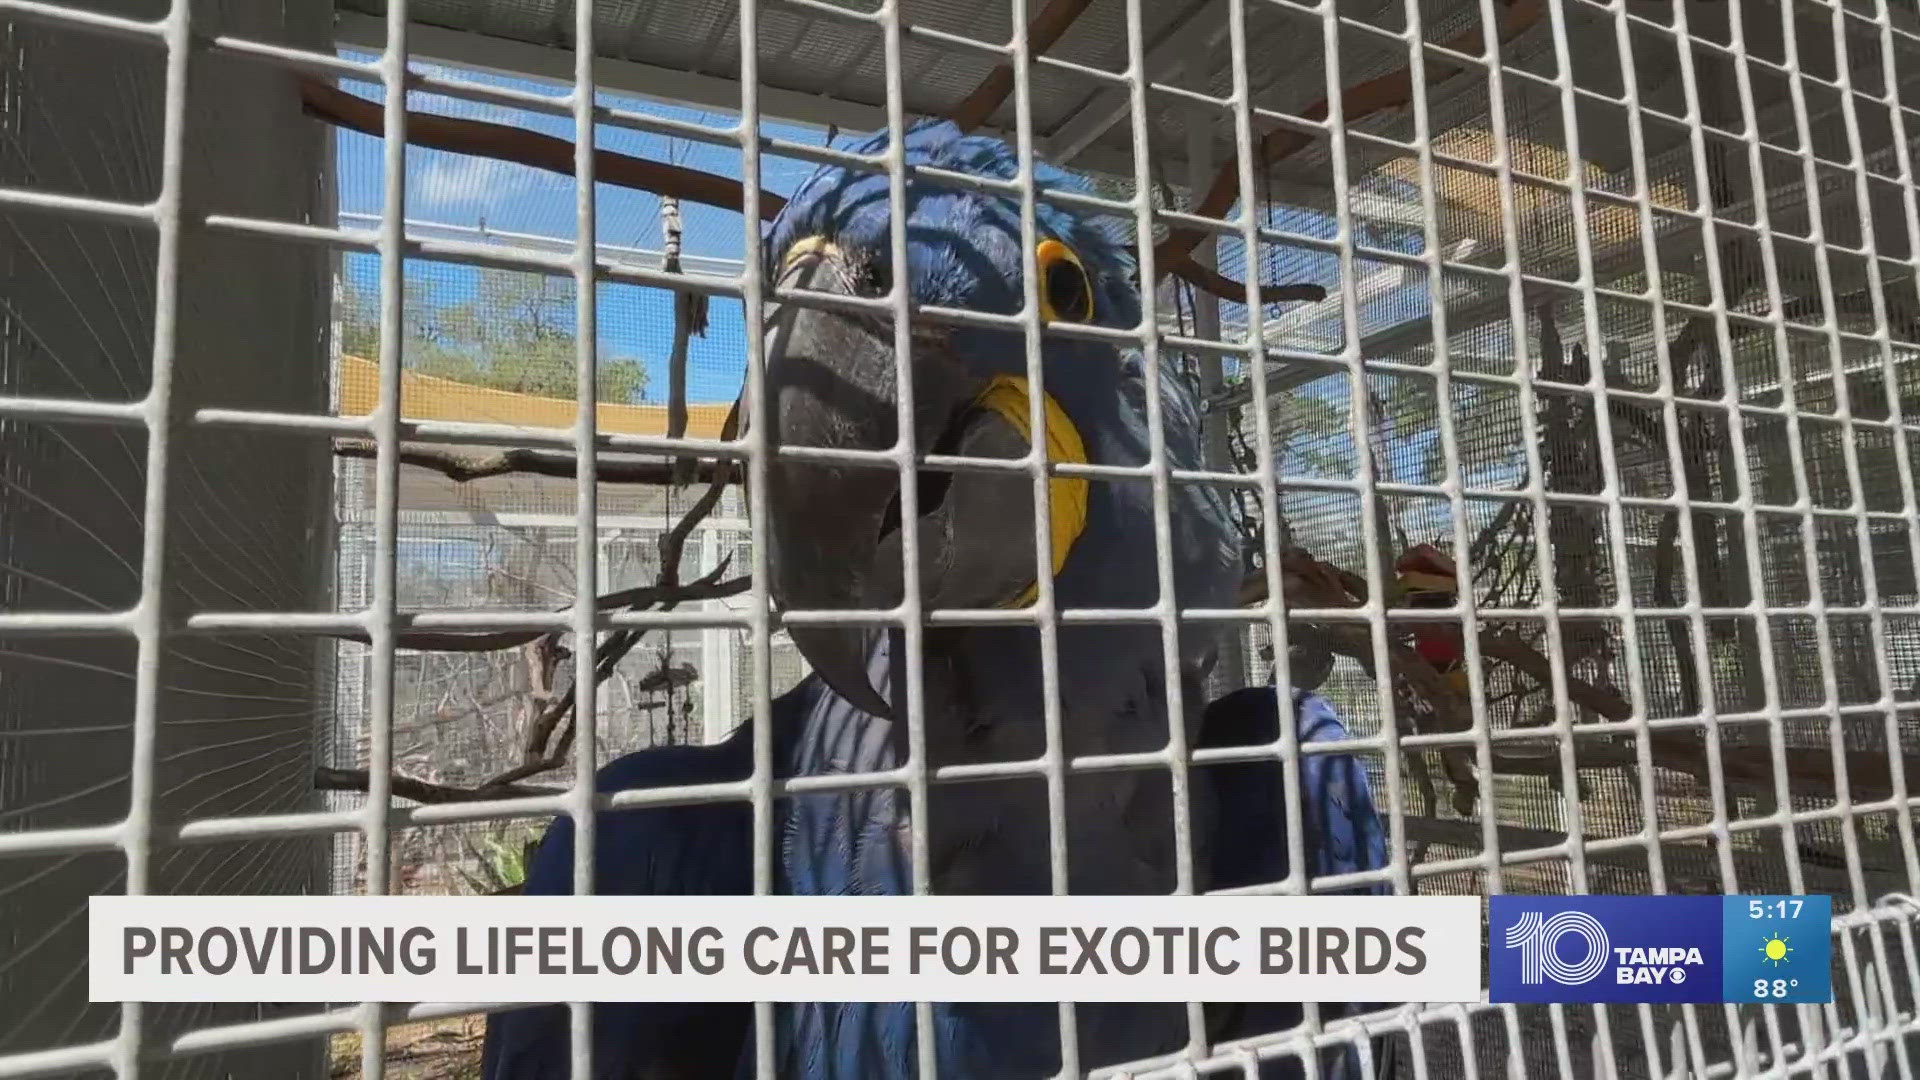 The Florida Exotic Bird Sanctuary doesn't adopt out, sell or breed parrots.